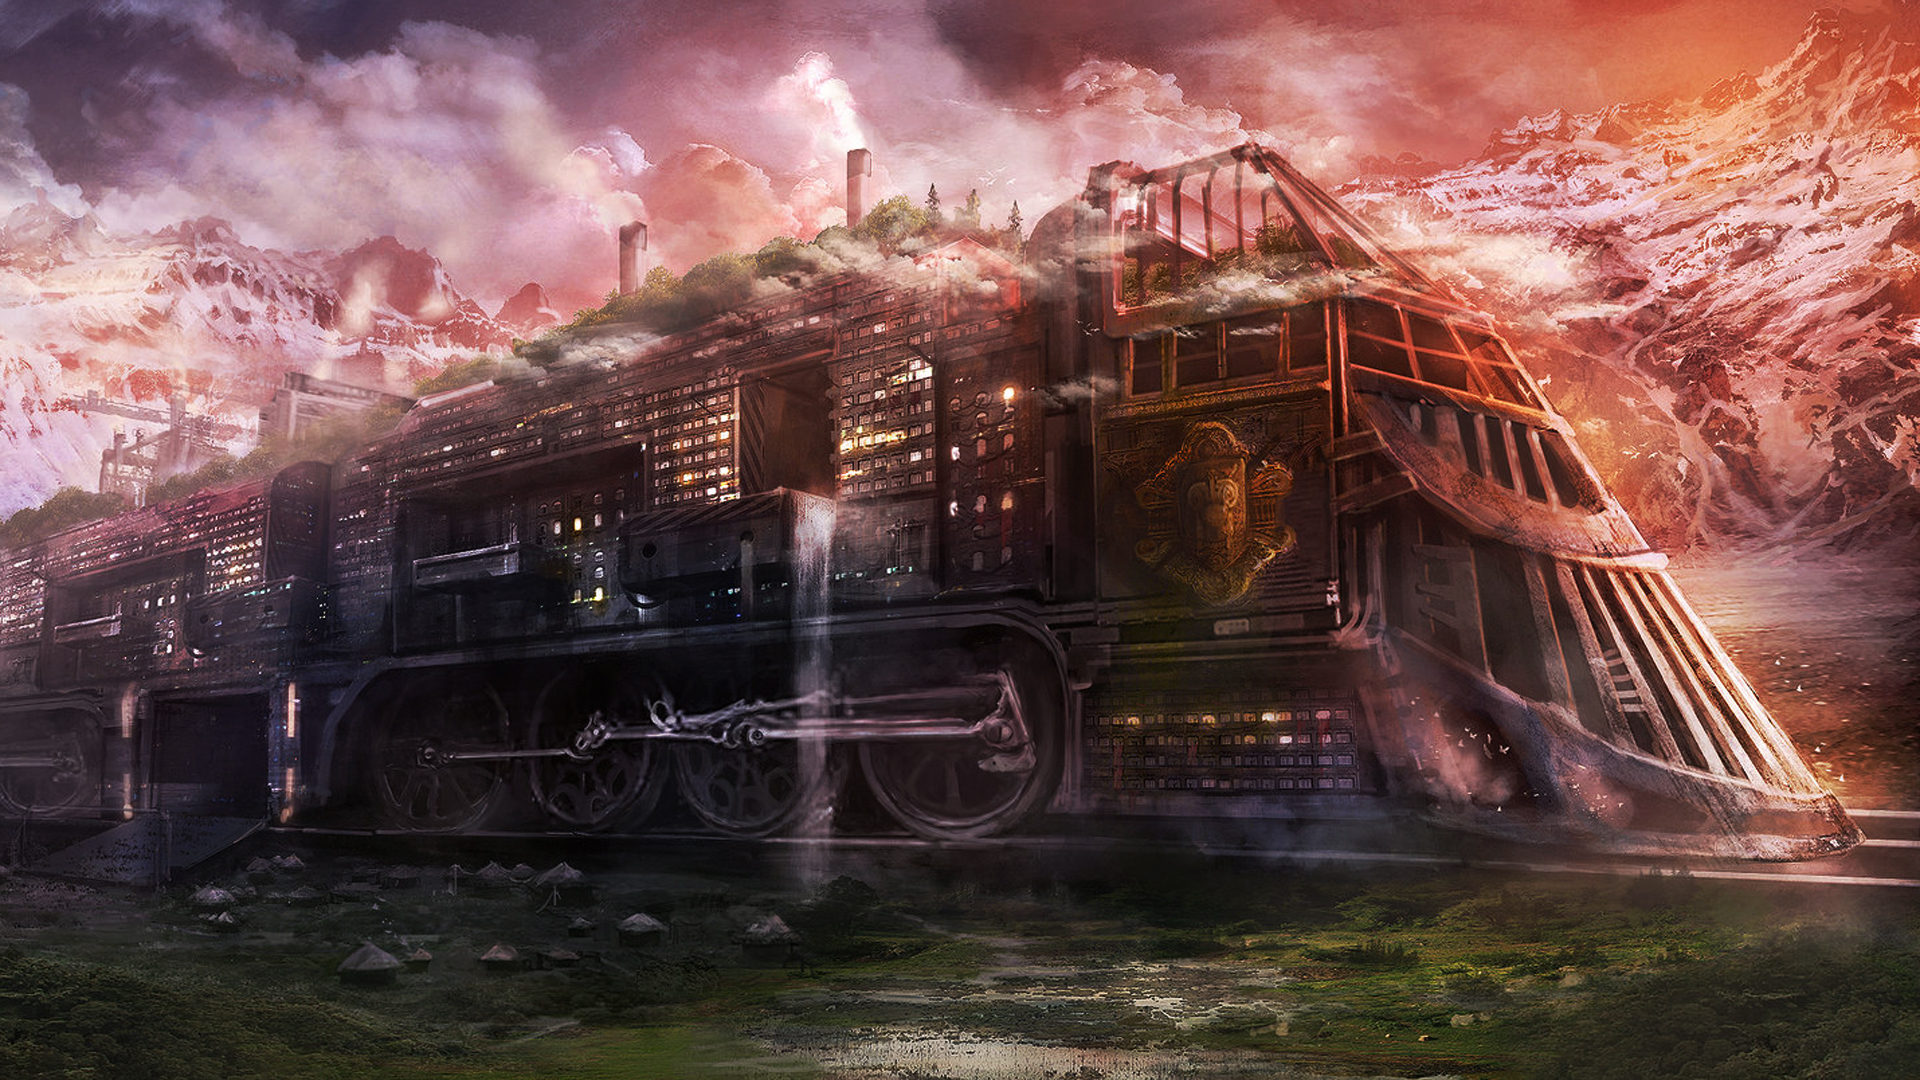 Free download Download Wallpaper Ghost Train Town 1920x1080 Picture [1920x1080] for your Desktop, Mobile & Tablet. Explore Ghost Town Wallpaper. Ghostly Wallpaper, Ghost Town Band Wallpaper, Ghost Town Wallpaper HD